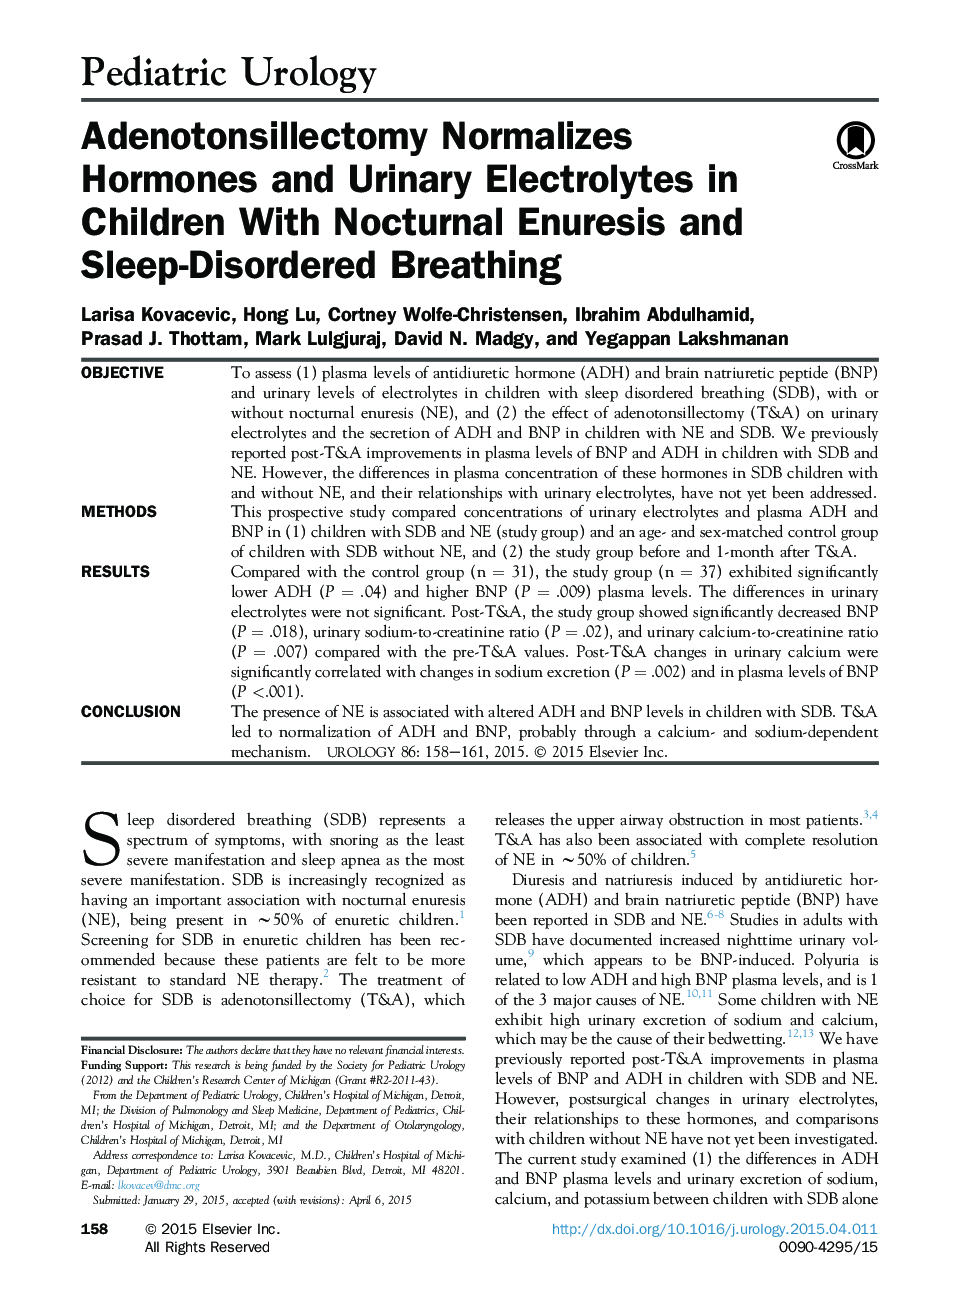 Adenotonsillectomy Normalizes Hormones and Urinary Electrolytes in Children With Nocturnal Enuresis and Sleep-Disordered Breathing 